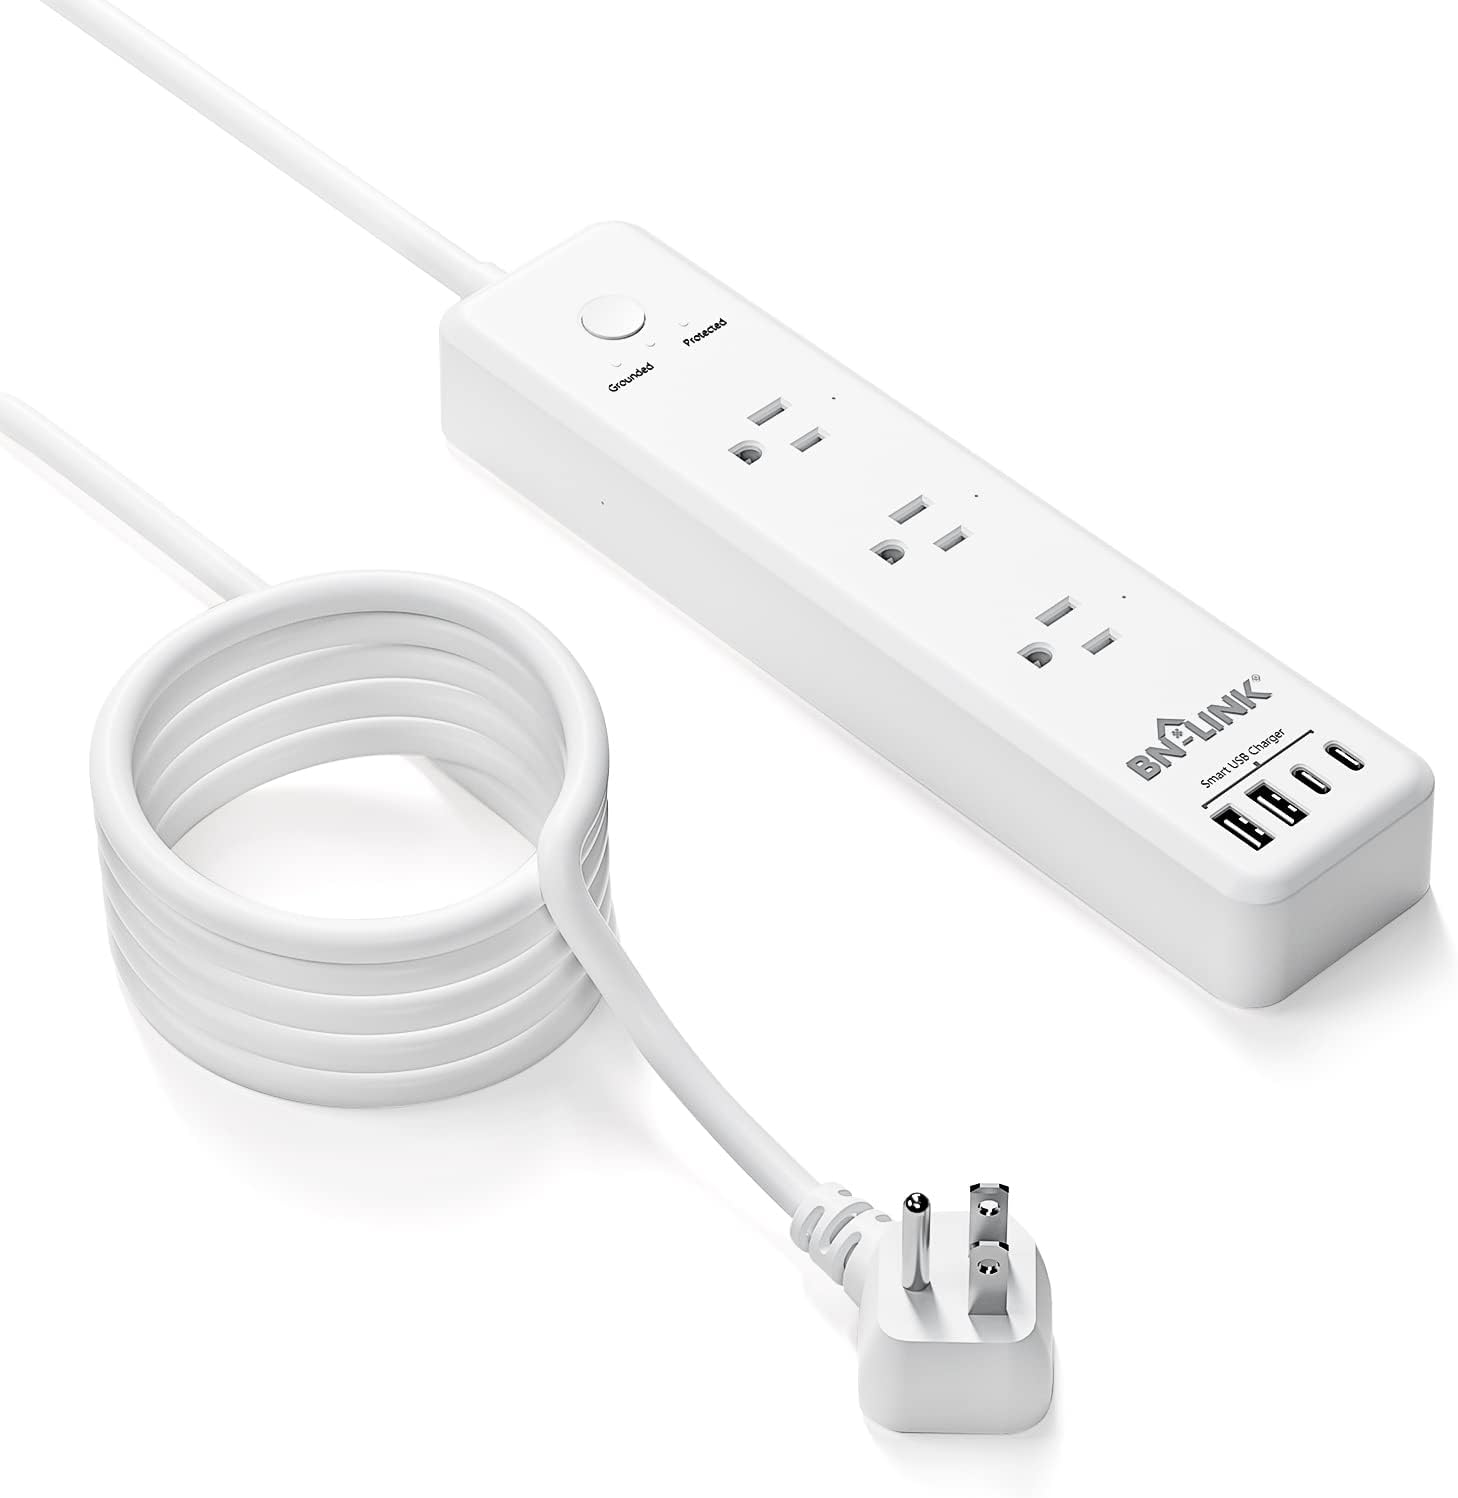  BSEED Power Strip with USB,3 Outlet Extension 3 USB